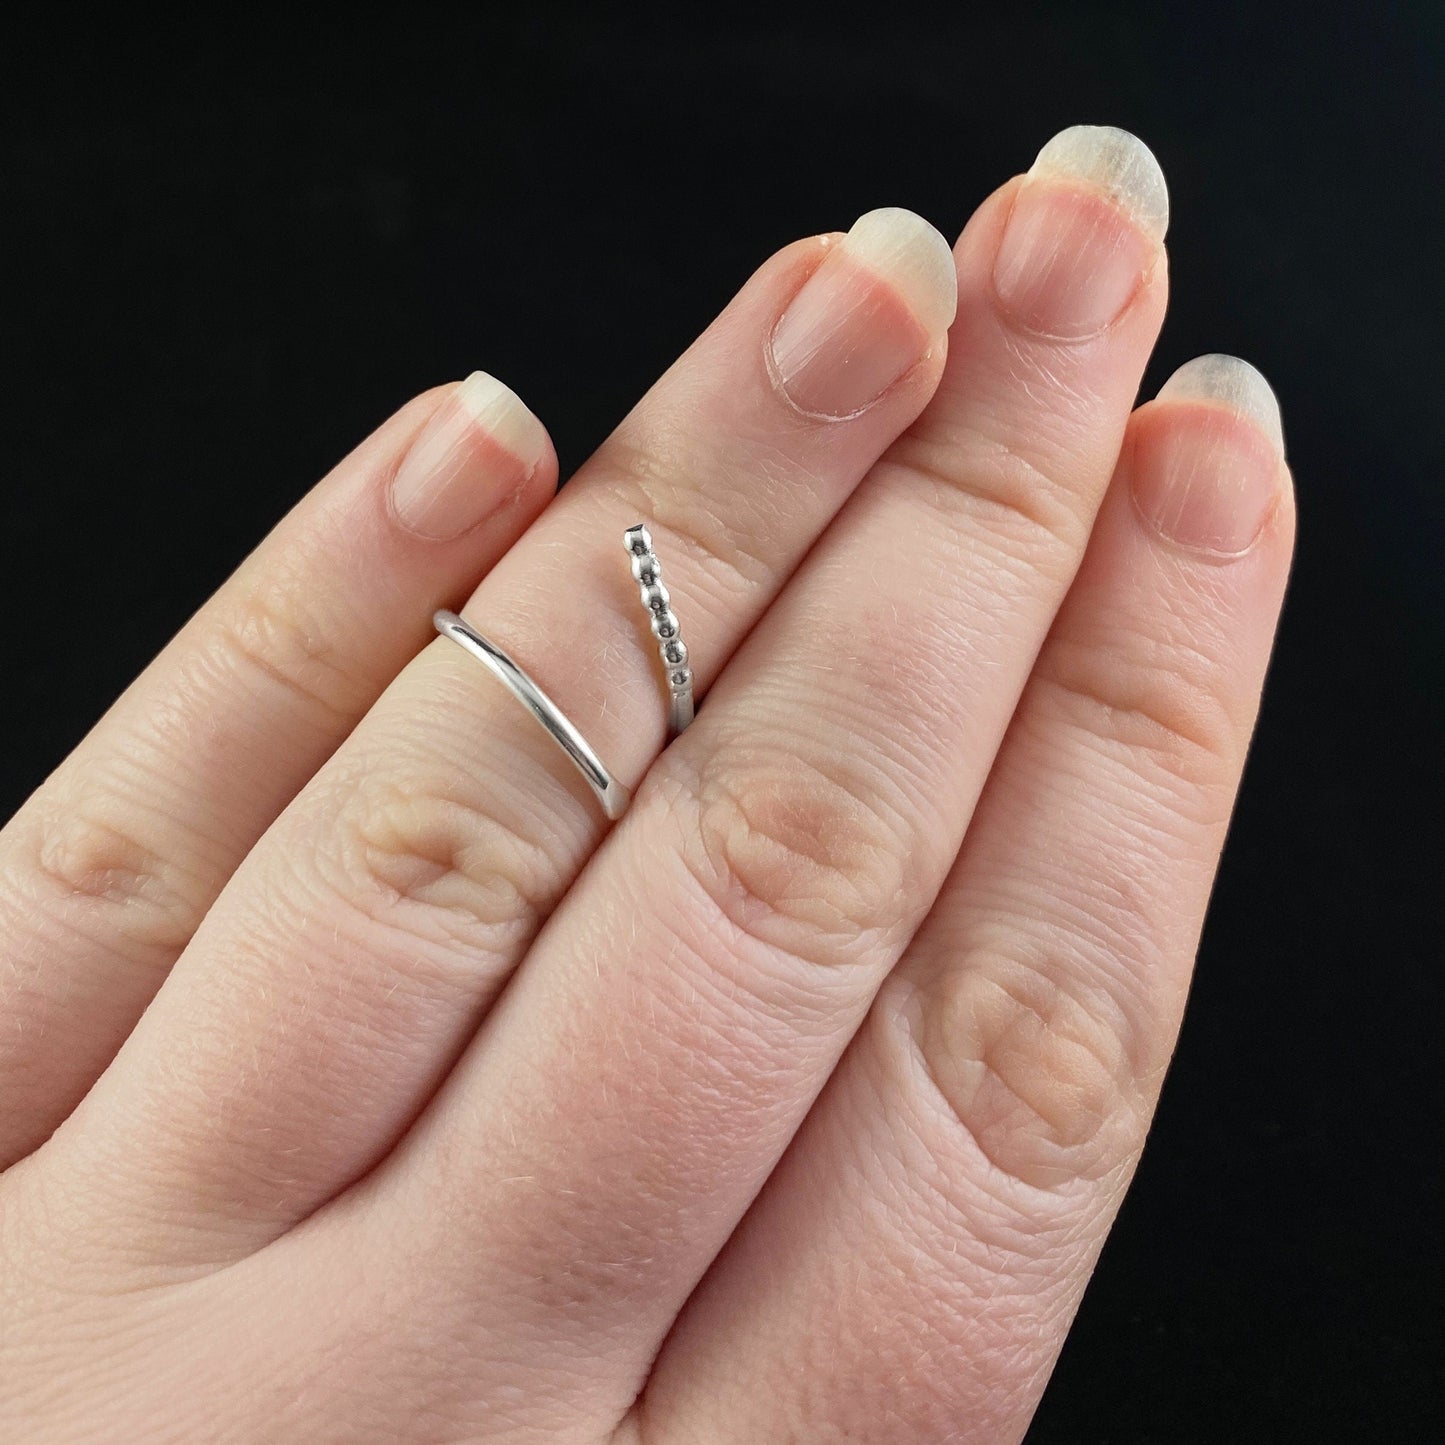 Dainty Silver Twist Ring with Silver Bead Accents - Rattlesnake